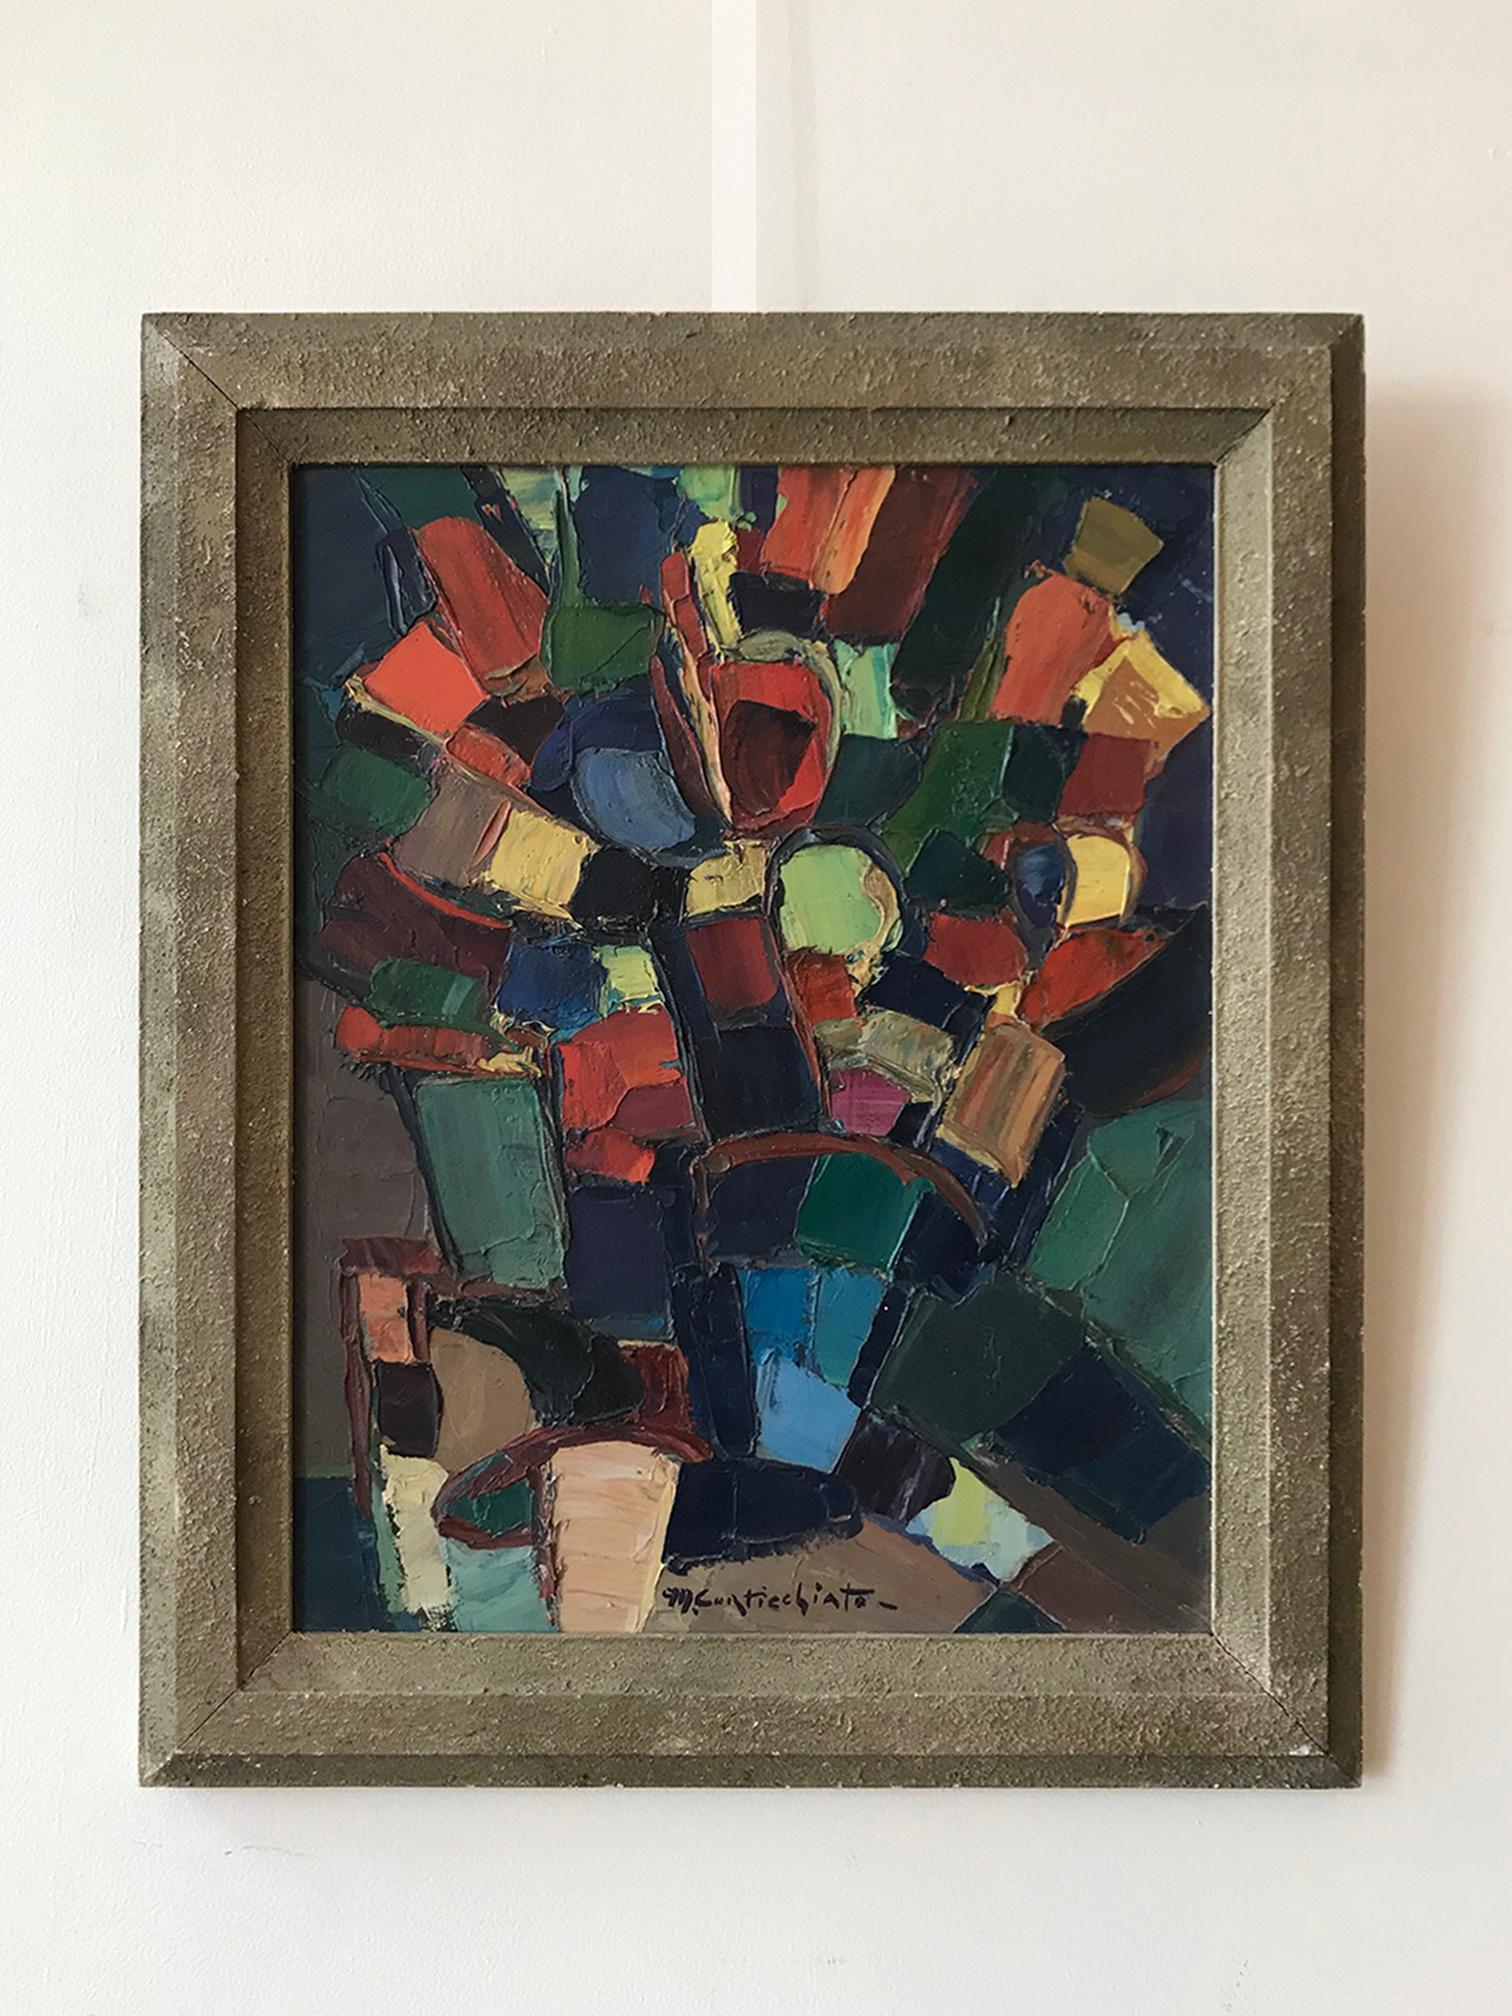 An abstract painting by M. Curtichiato
Polychrome oil on panel.
Corsica, Circa 1950